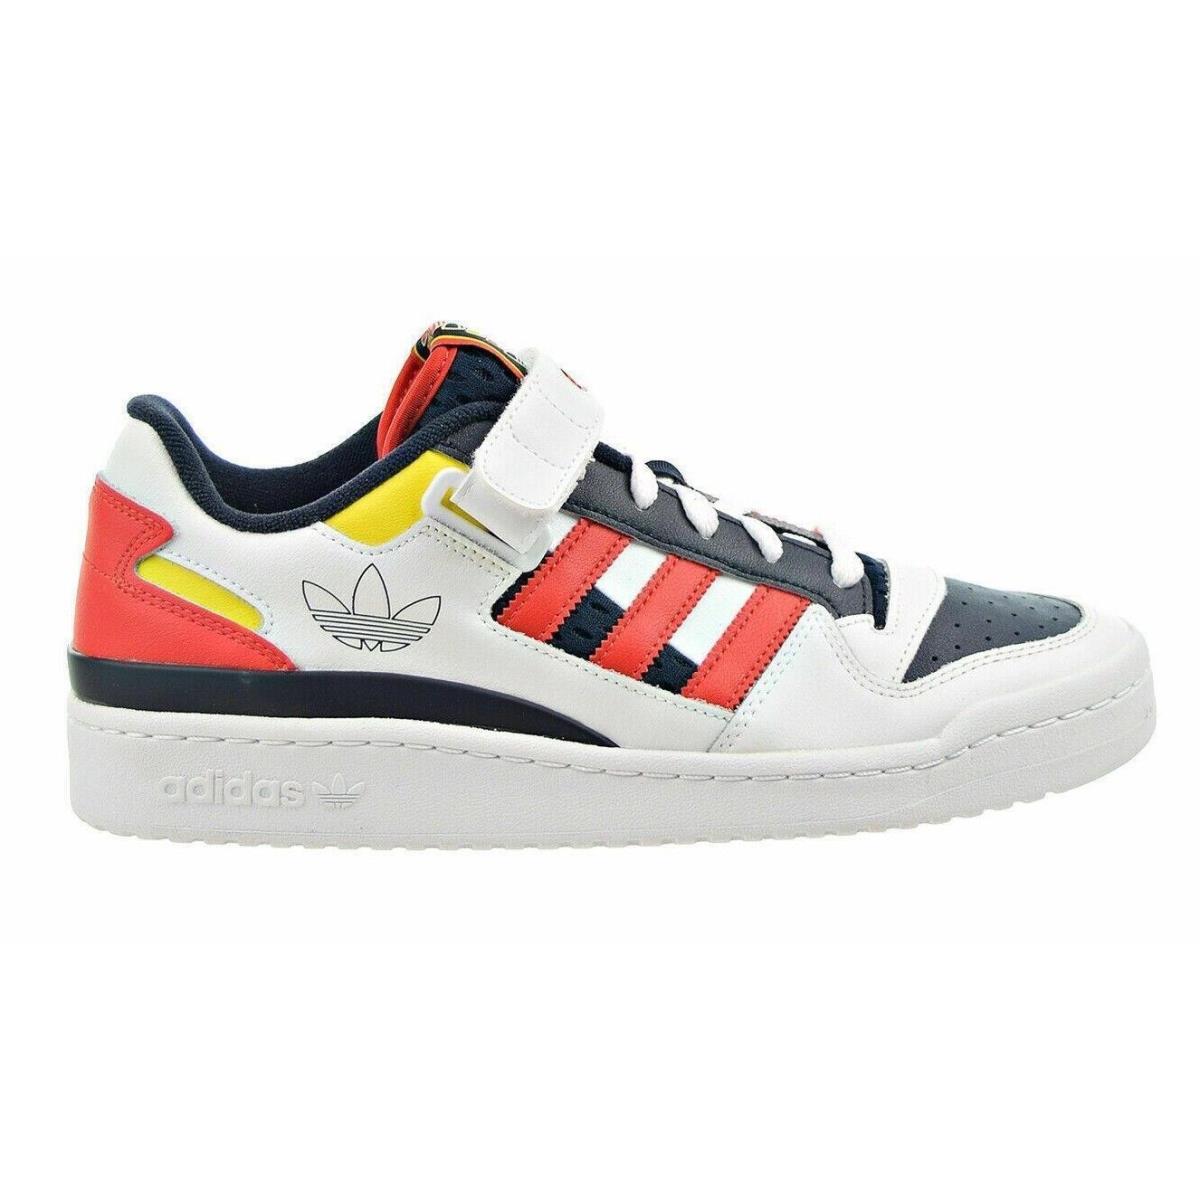 Adidas Forum Low Men`s Size 10 Casual Shoes White/legend Ink/red GZ9112